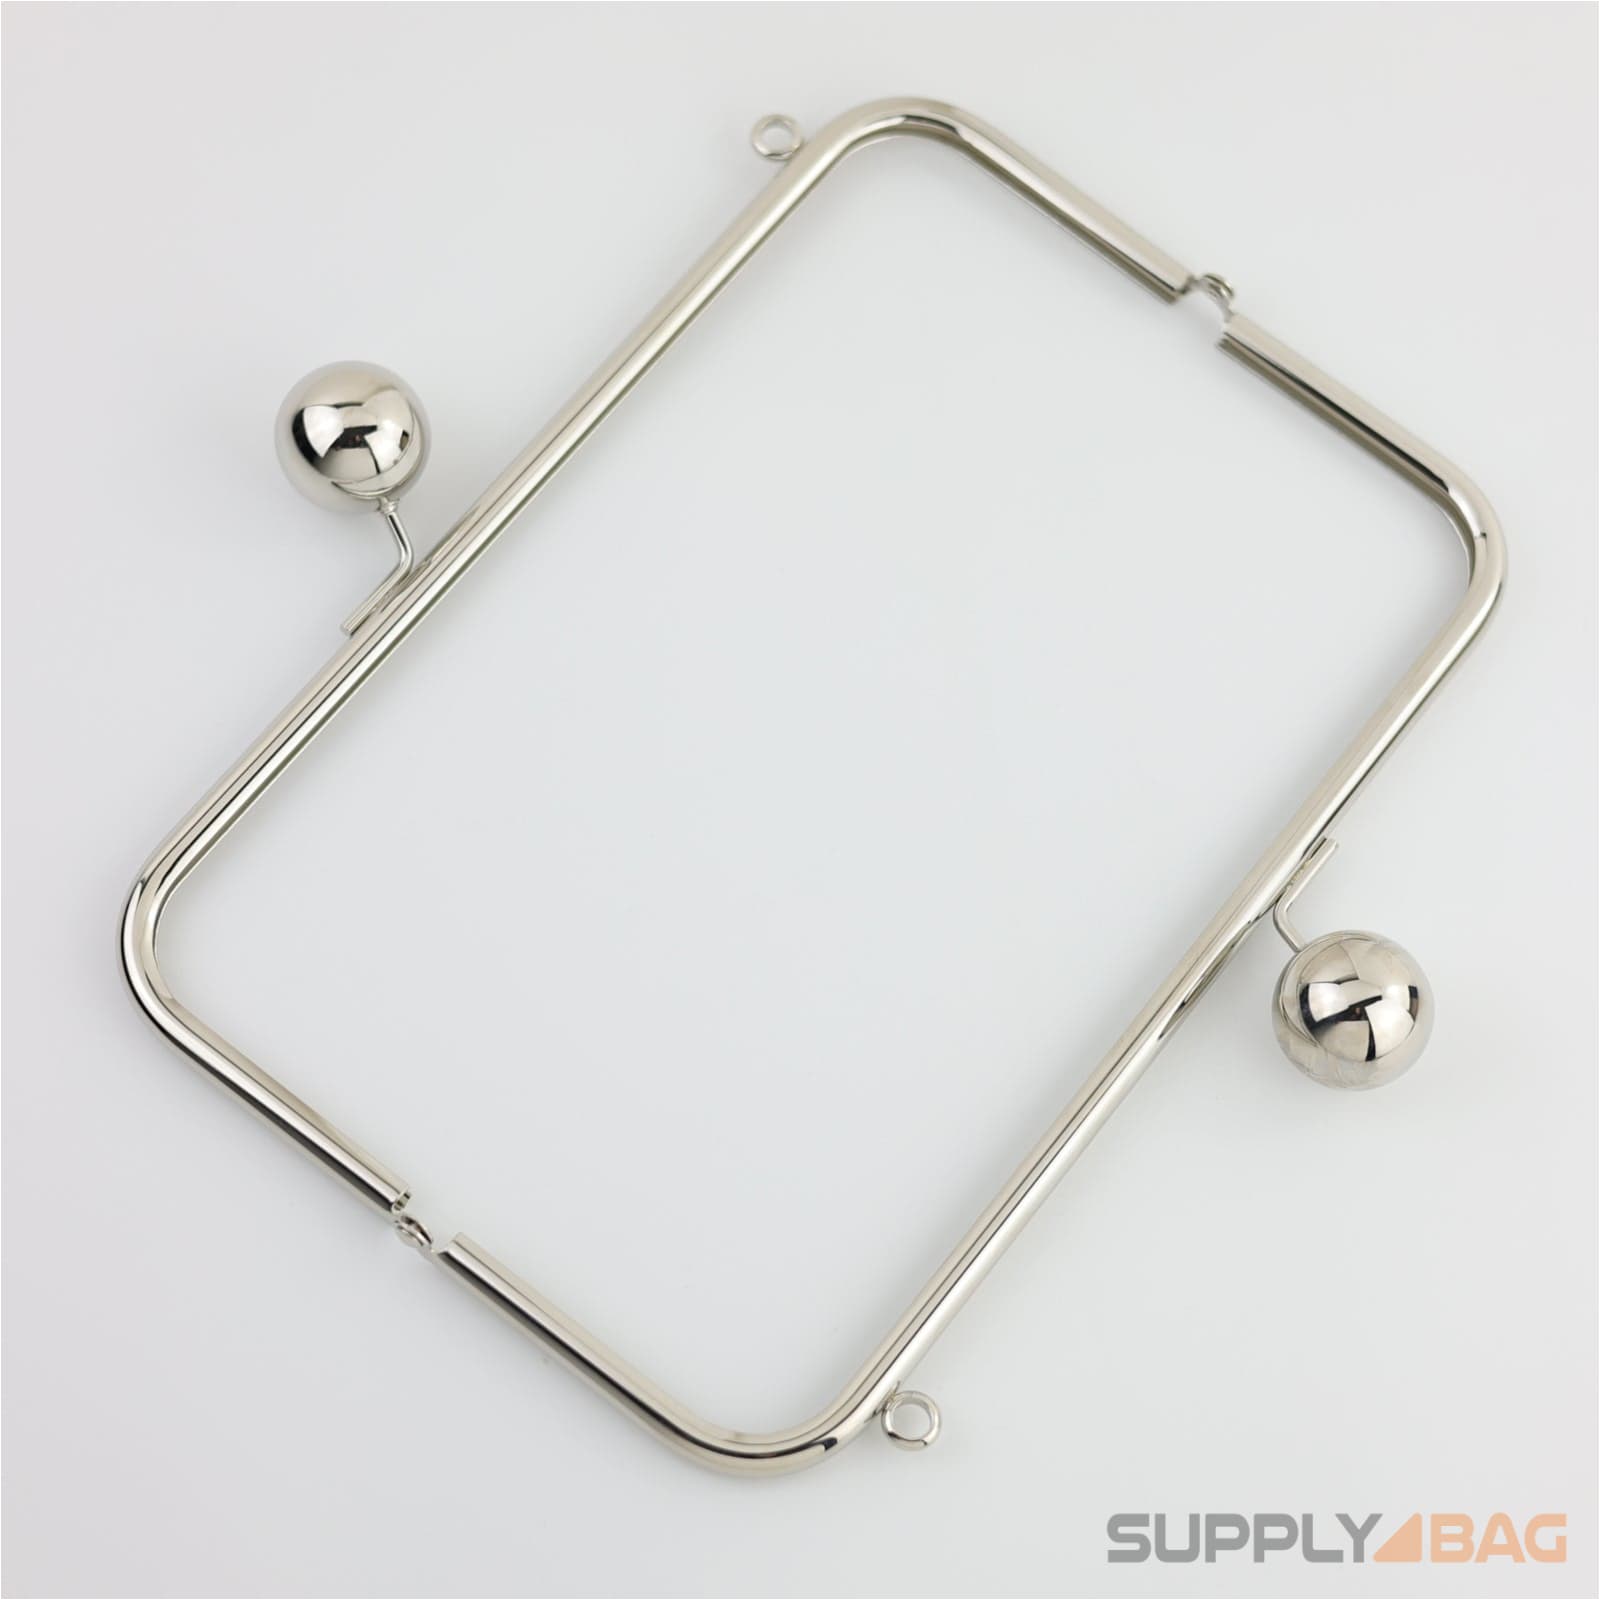 10 x 3.5 inch - Huge Ball Clasp Silver Metal Purse Frame with O Rings